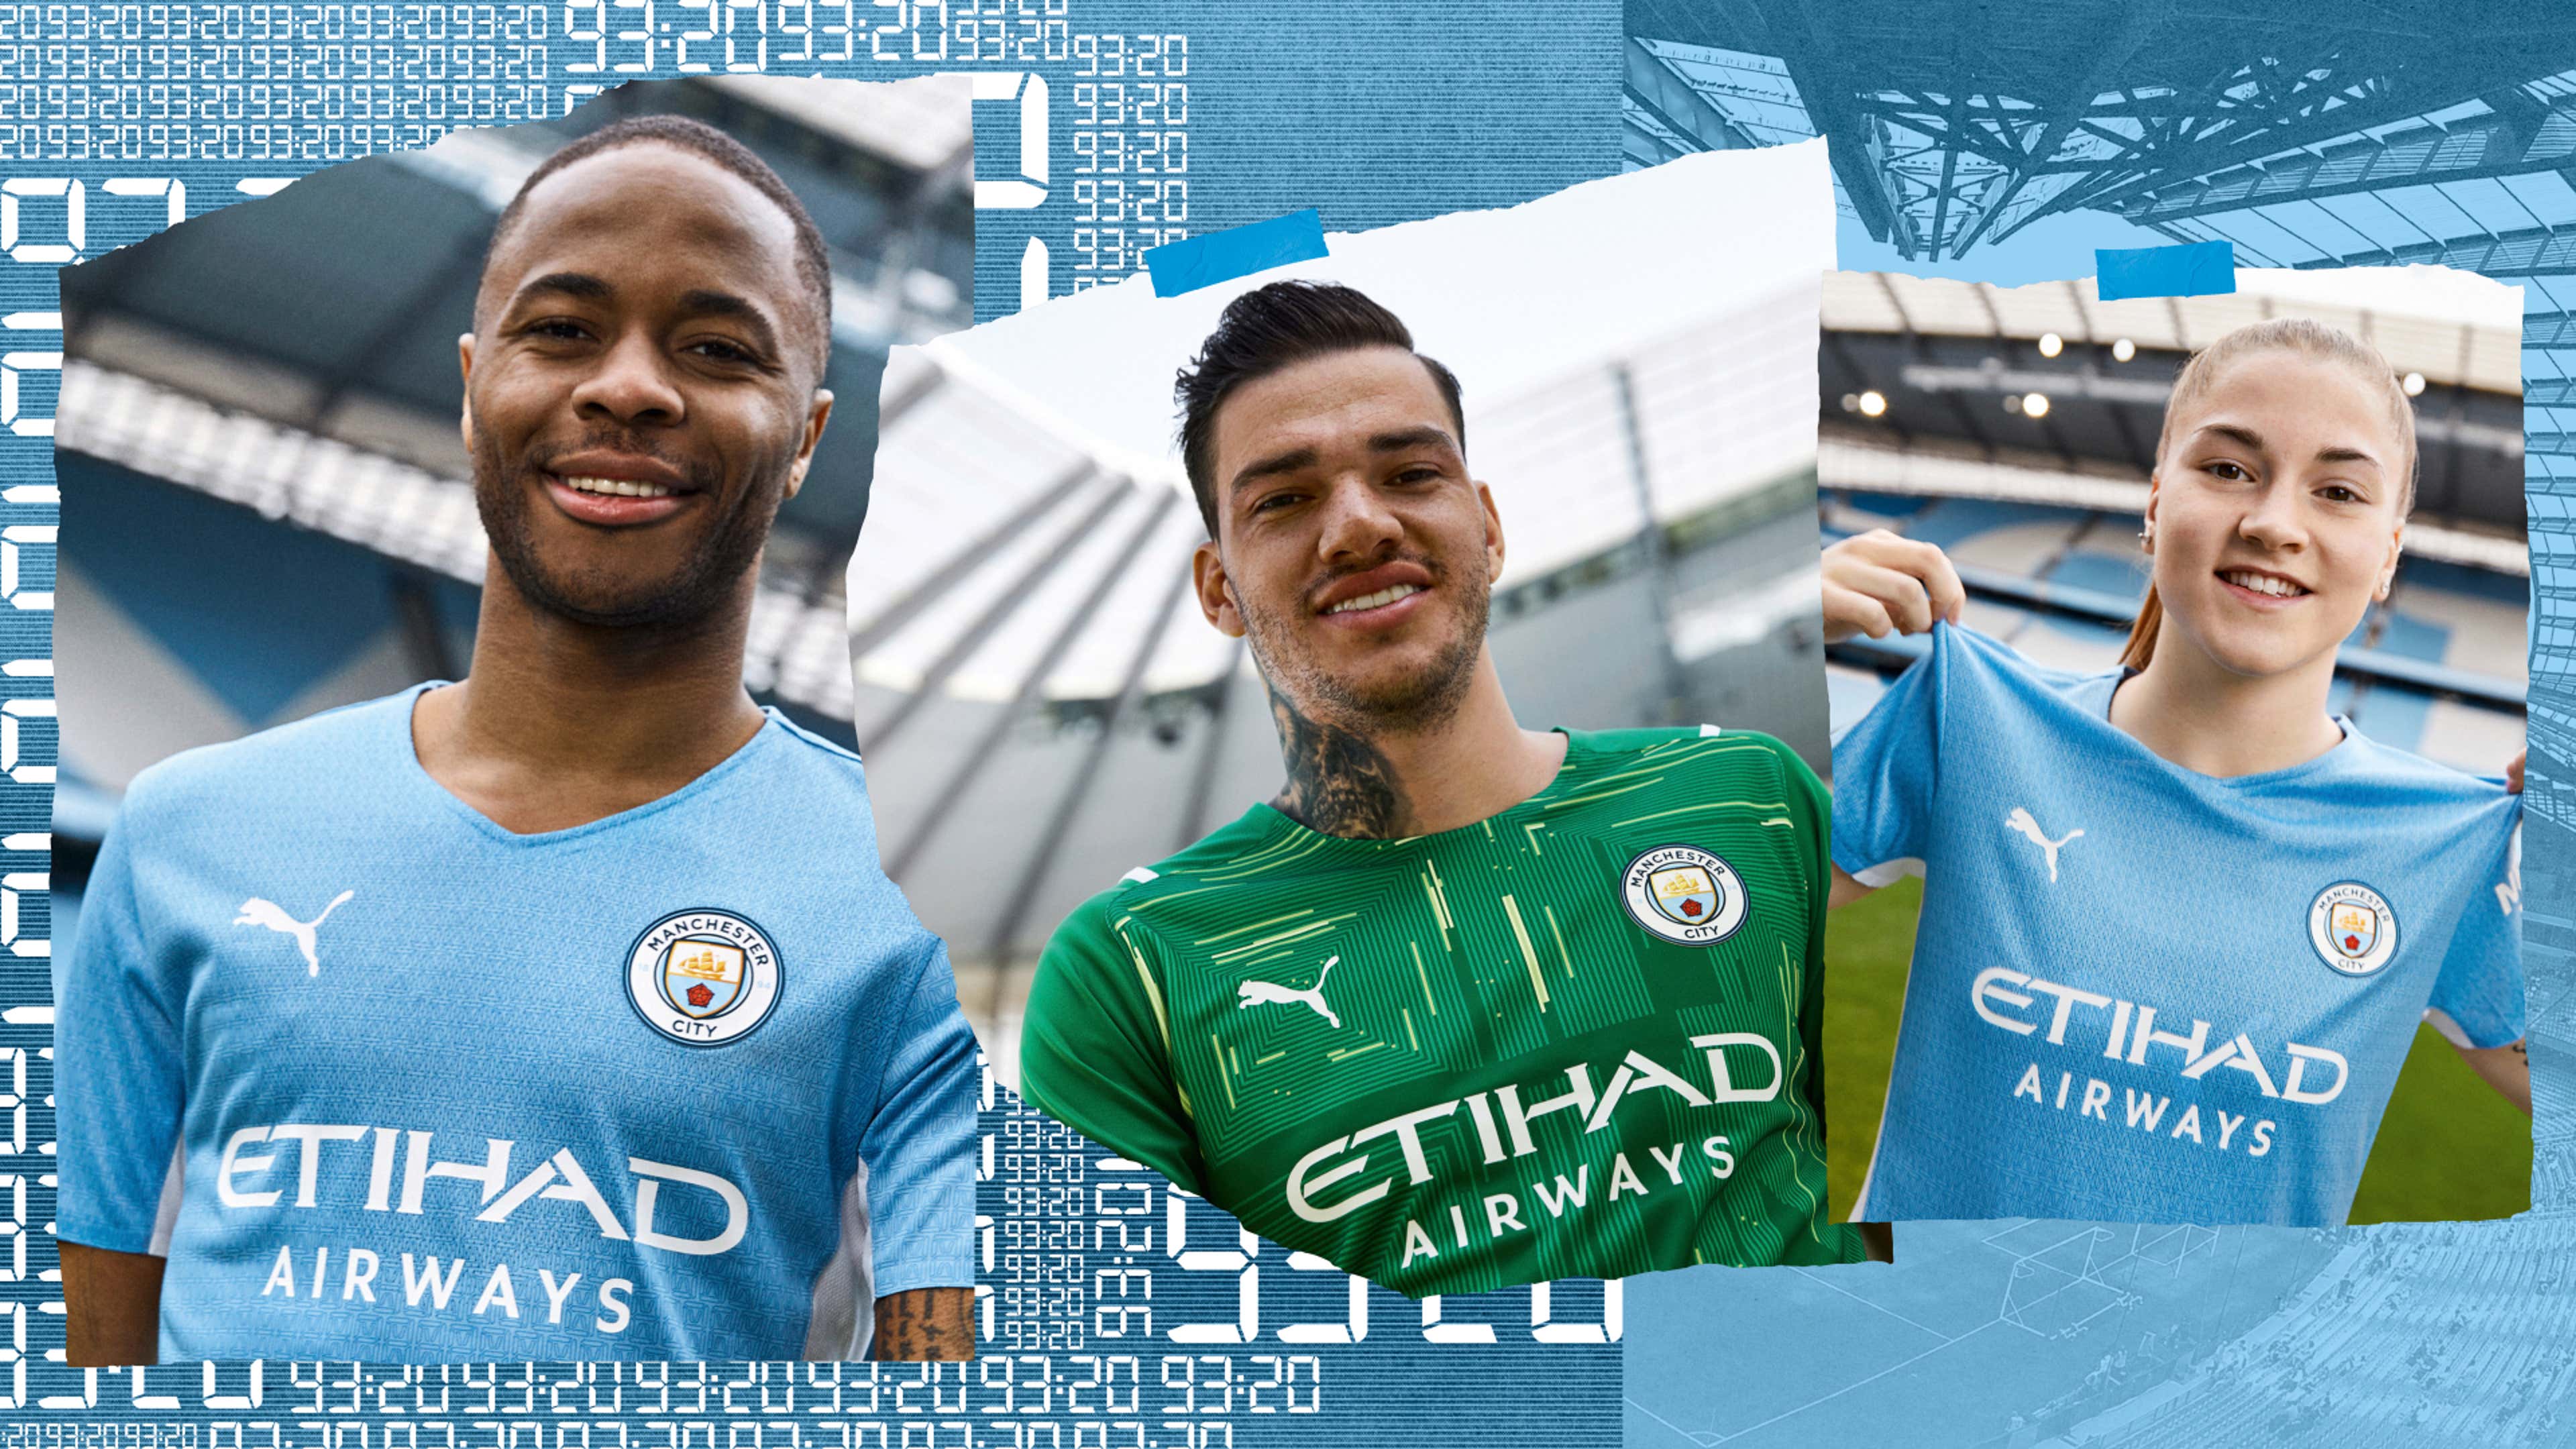 Jersey design took two years' - Here's how Man City's new jersey was  conceptualised!